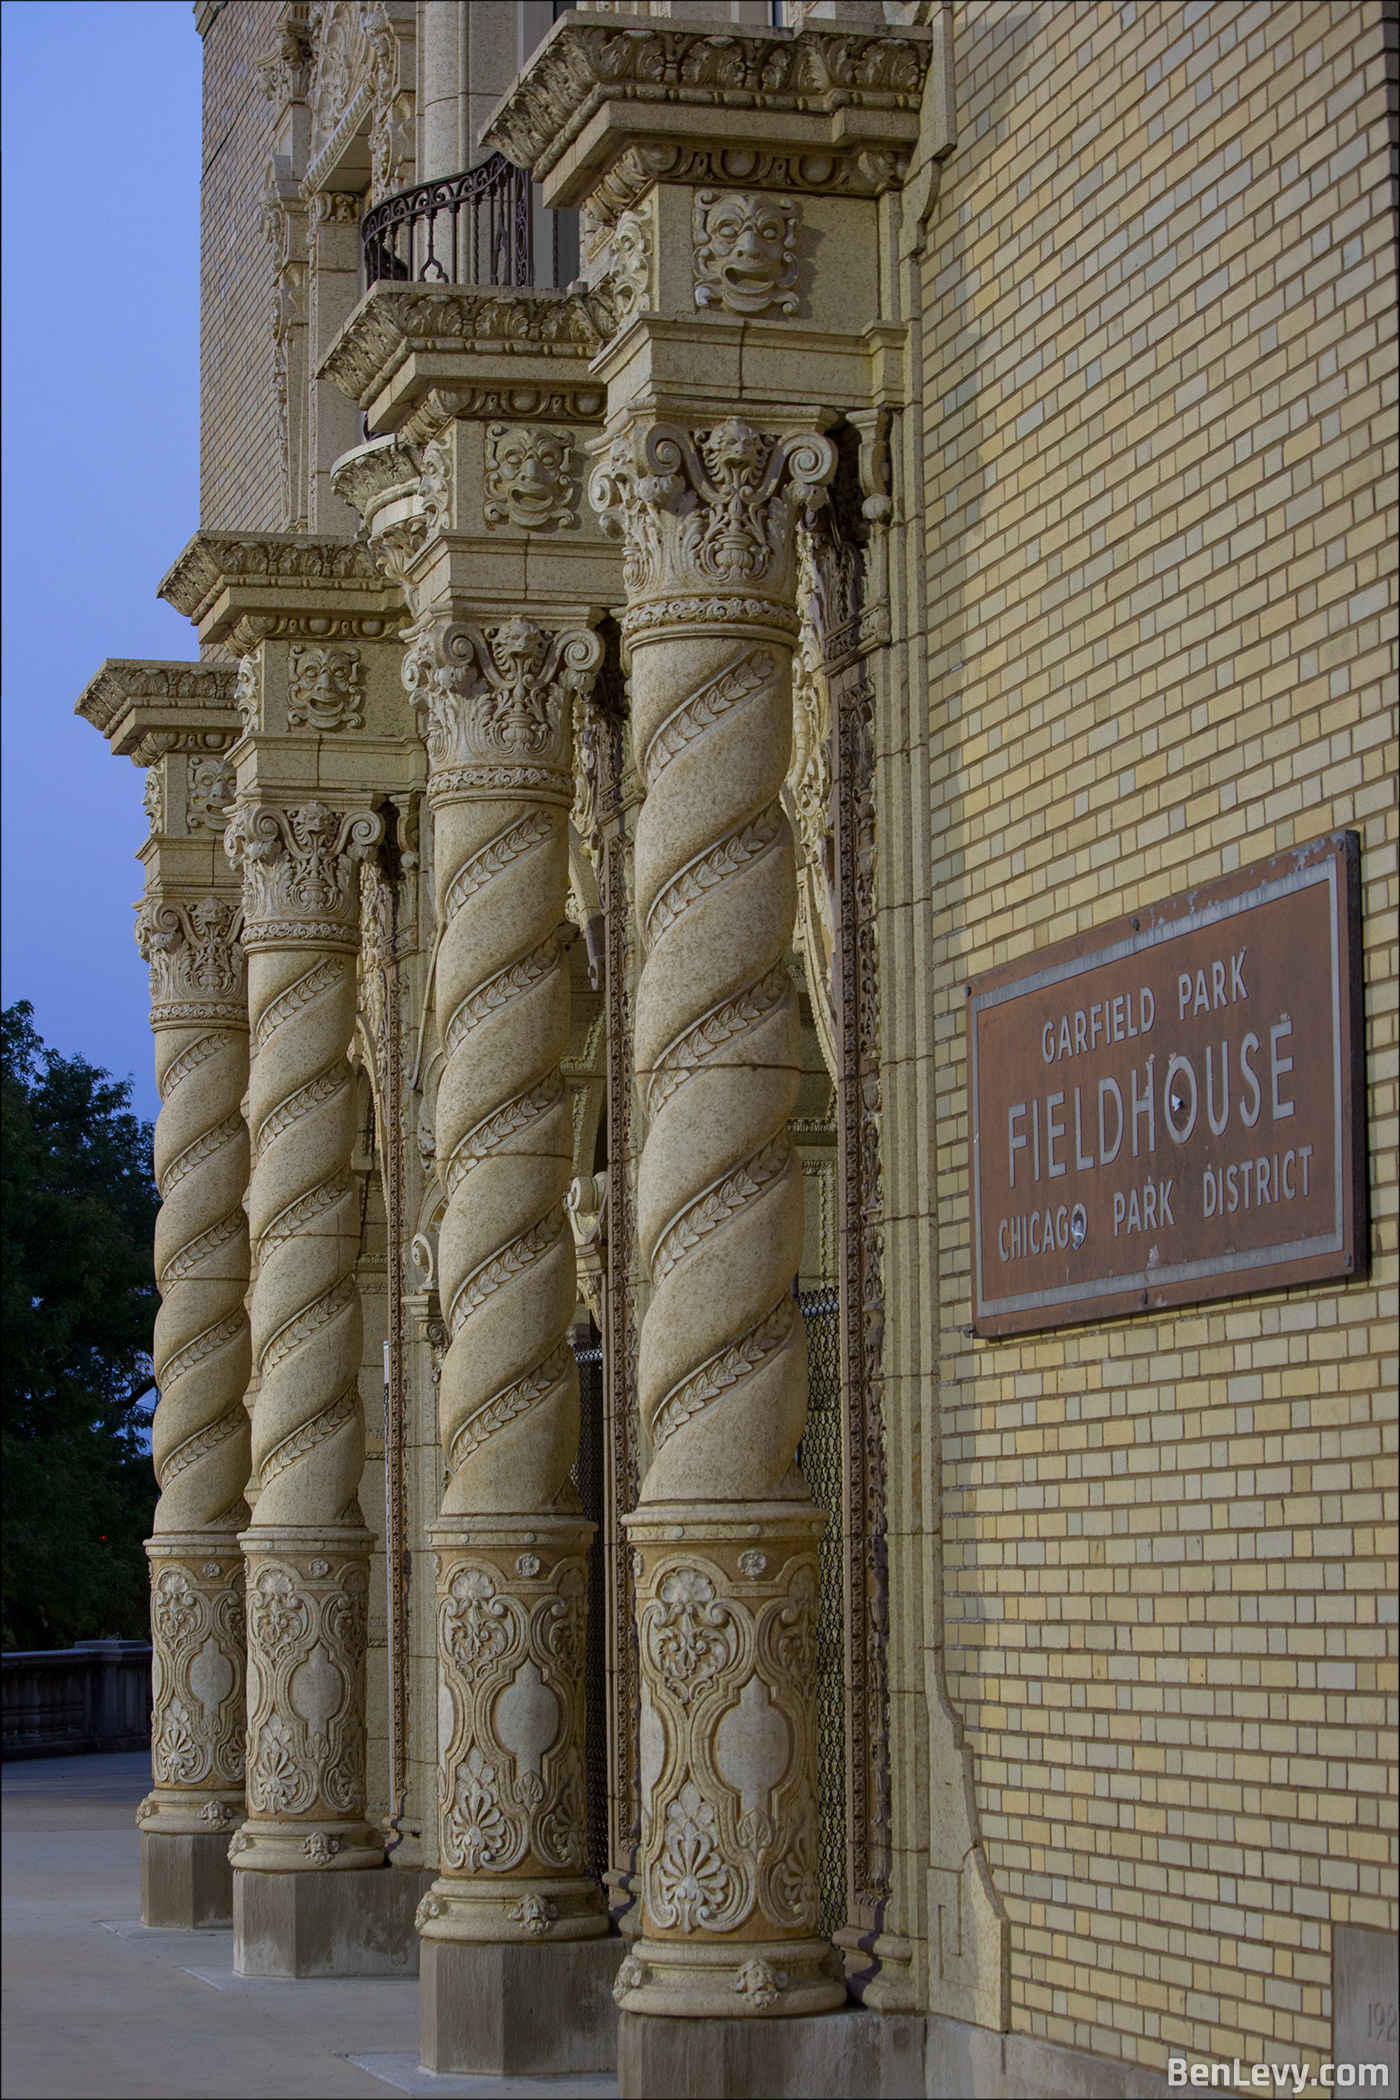 Twisted columns on the Garfield Park Fieldhouse